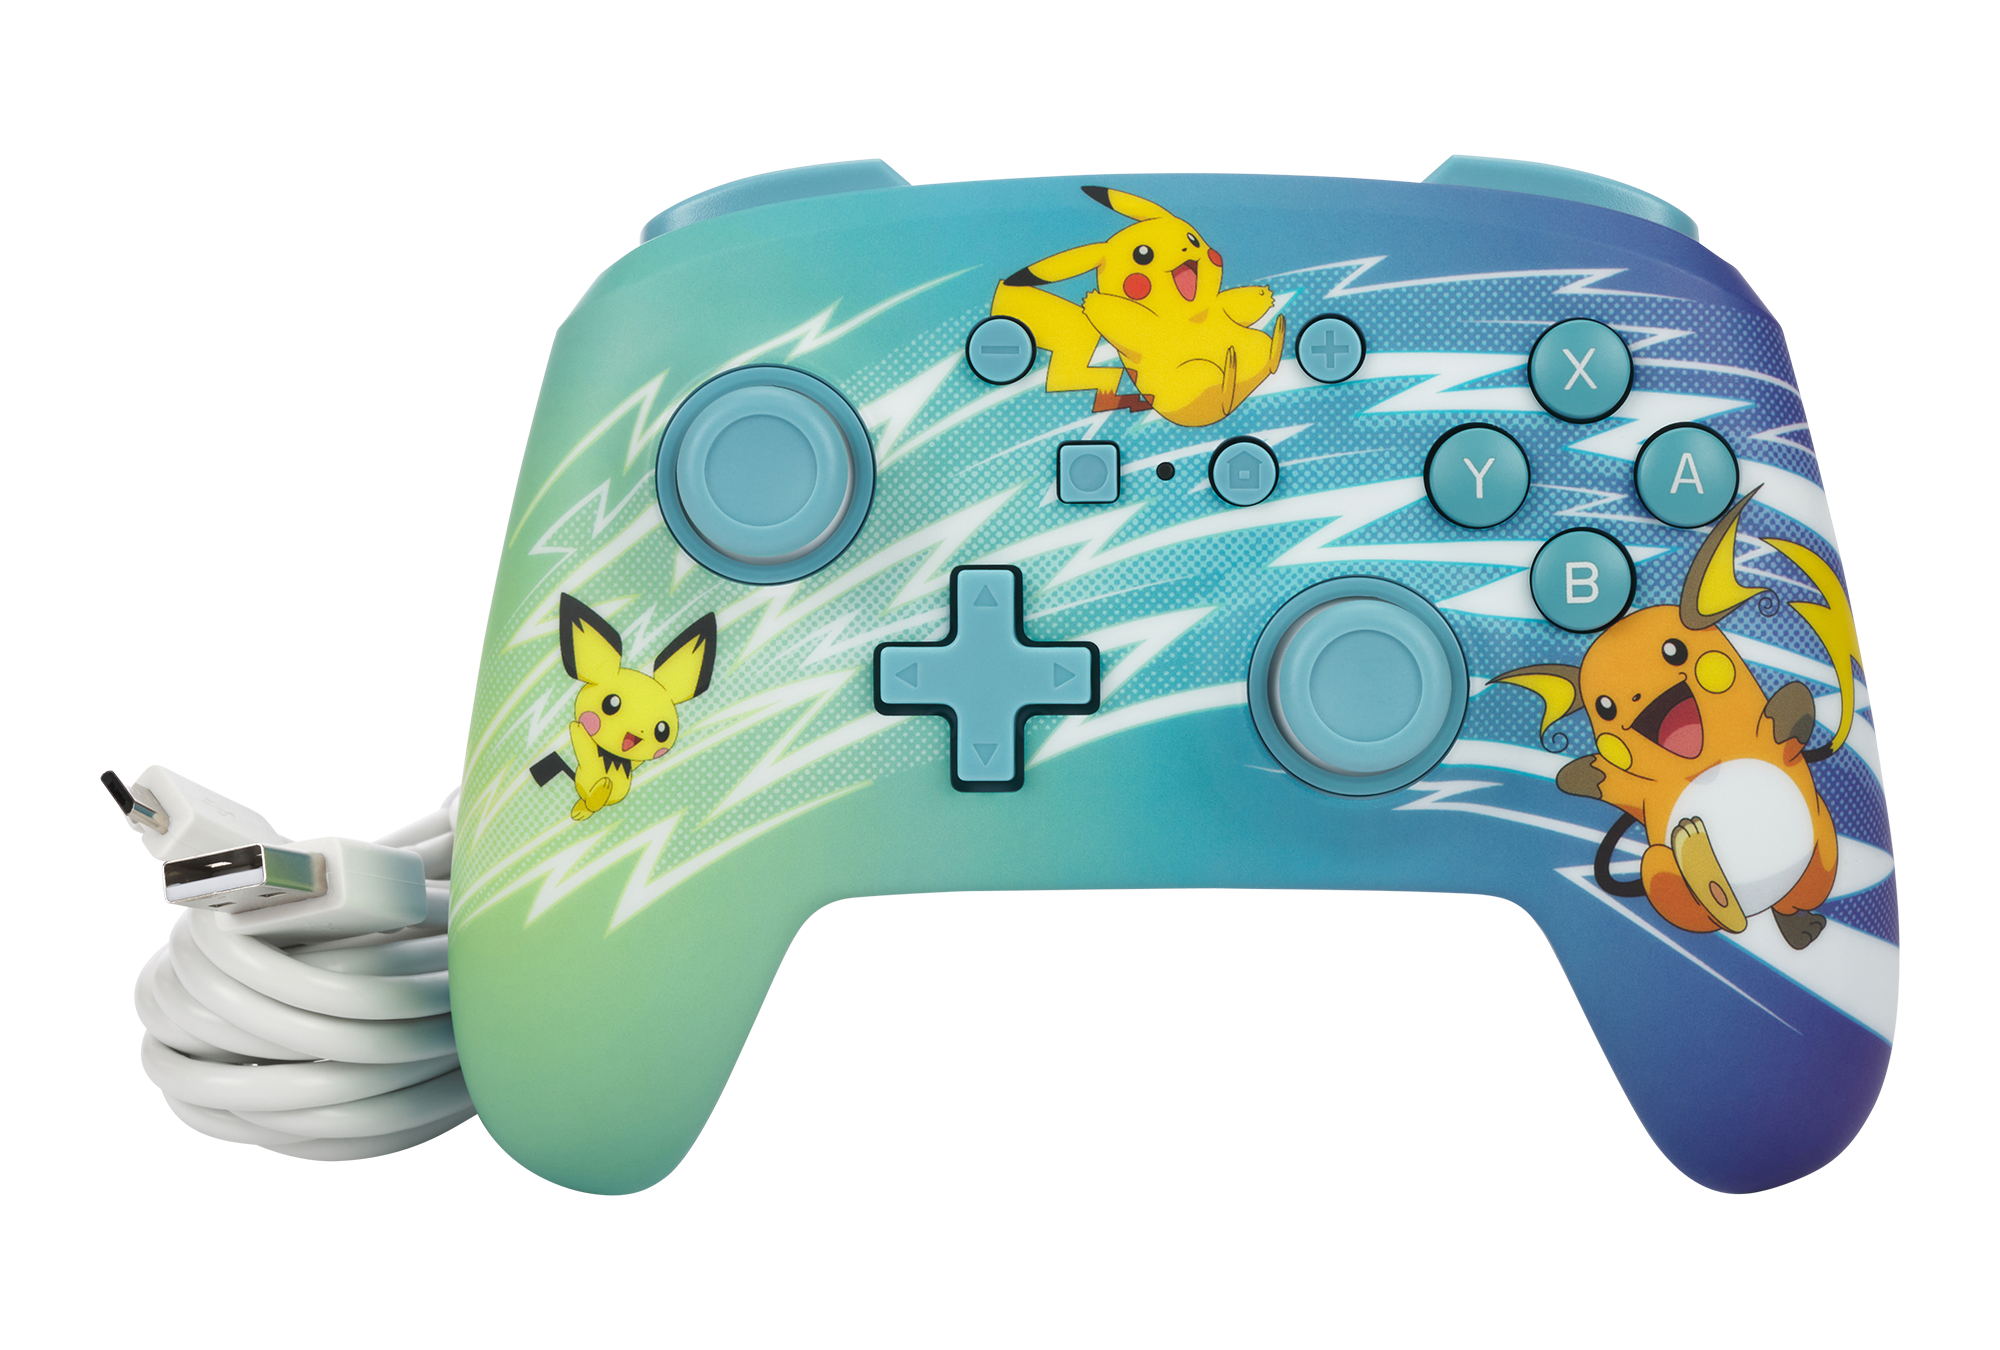 PowerA Enhanced Wired Controller for Nintendo Switch Pikachu Evolution